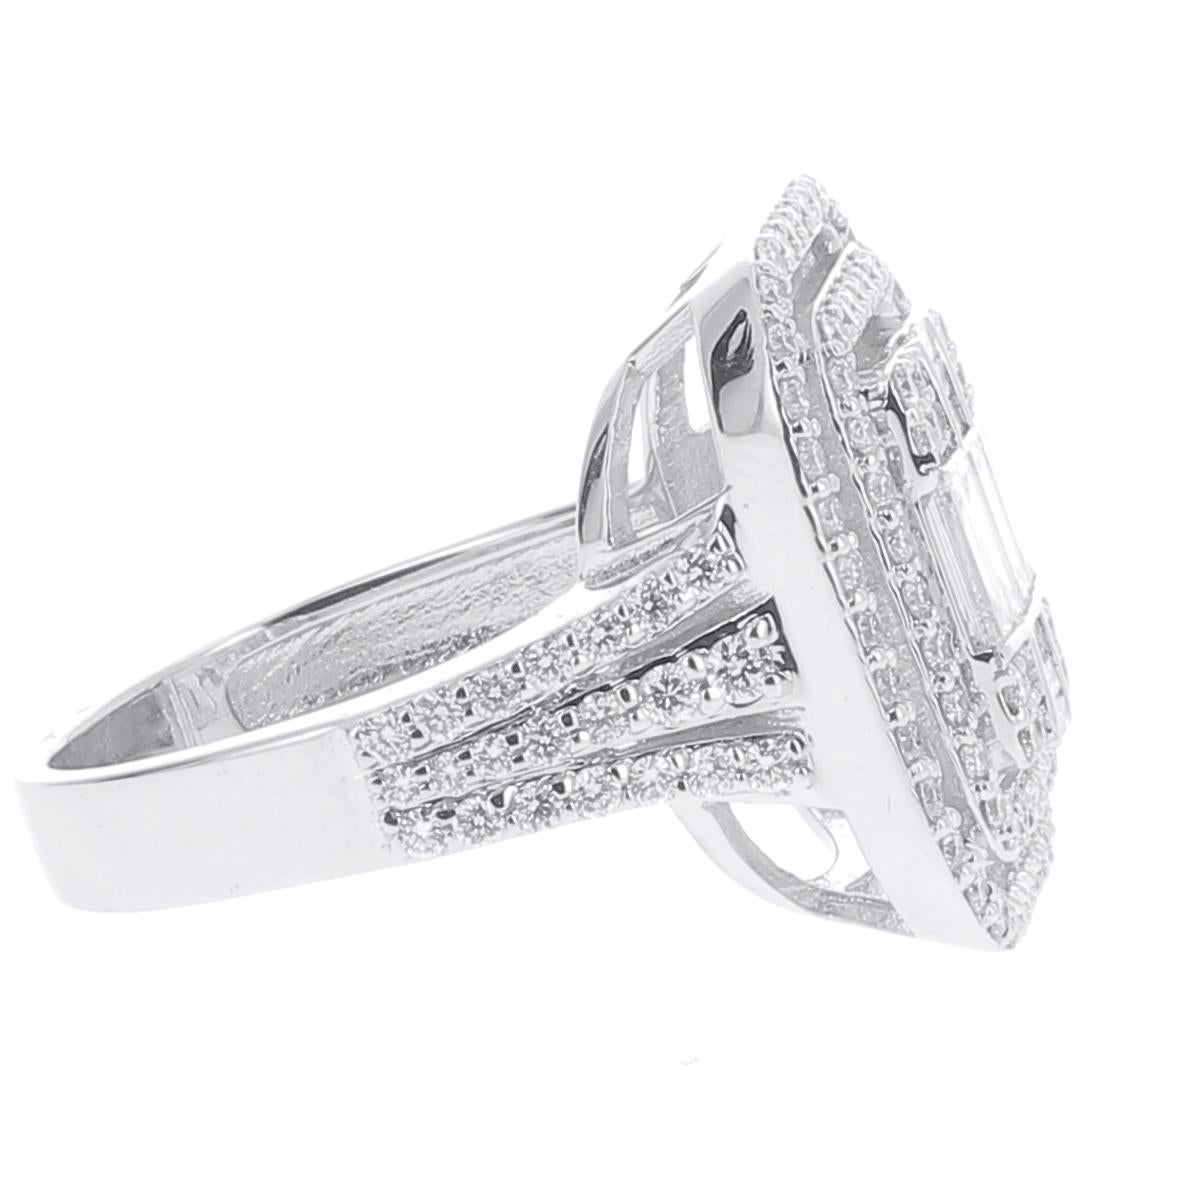 A unique Emerald Cut Illusion Diamonds Ring set with Round Diamonds and Baguettes Diamonds giving the impression of One Emerald Cut Diamond.
The ring is set with Baguettes Diamonds and Round Diamonds weighing 1.37 Carats  
The Diamonds are GVS